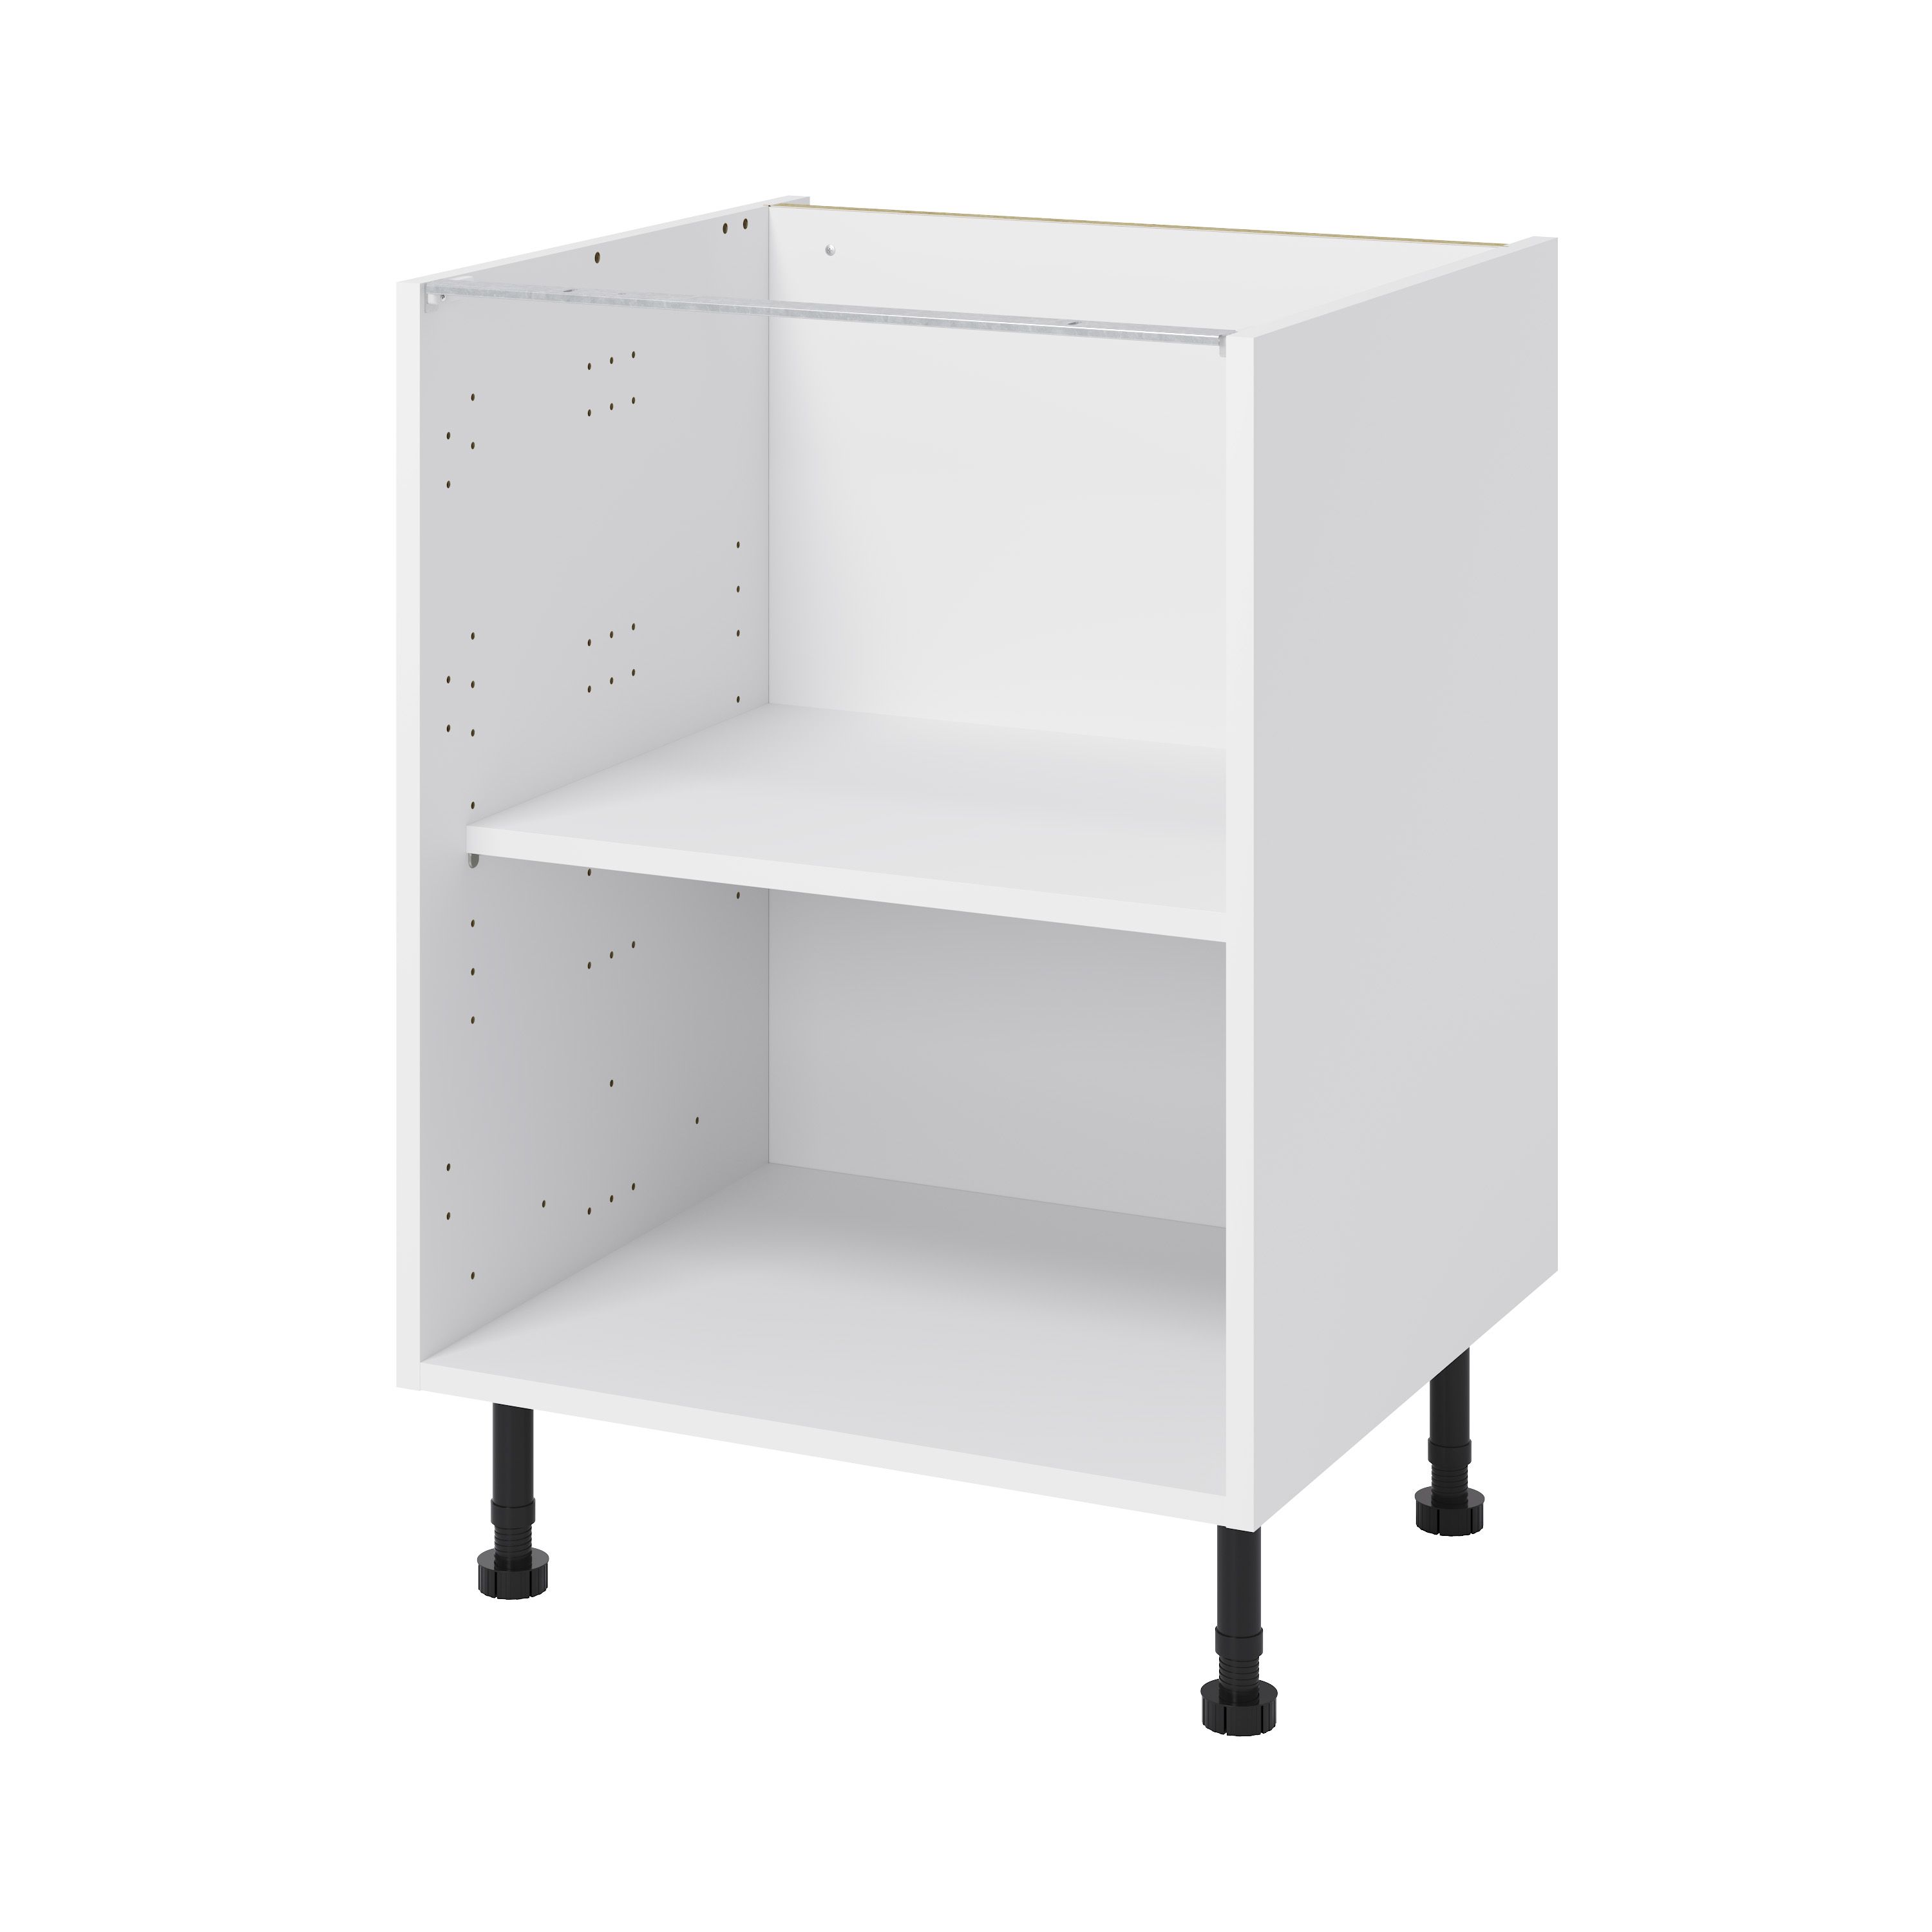 Goodhome Caraway White Base Cabinet W 600mm Departments Diy